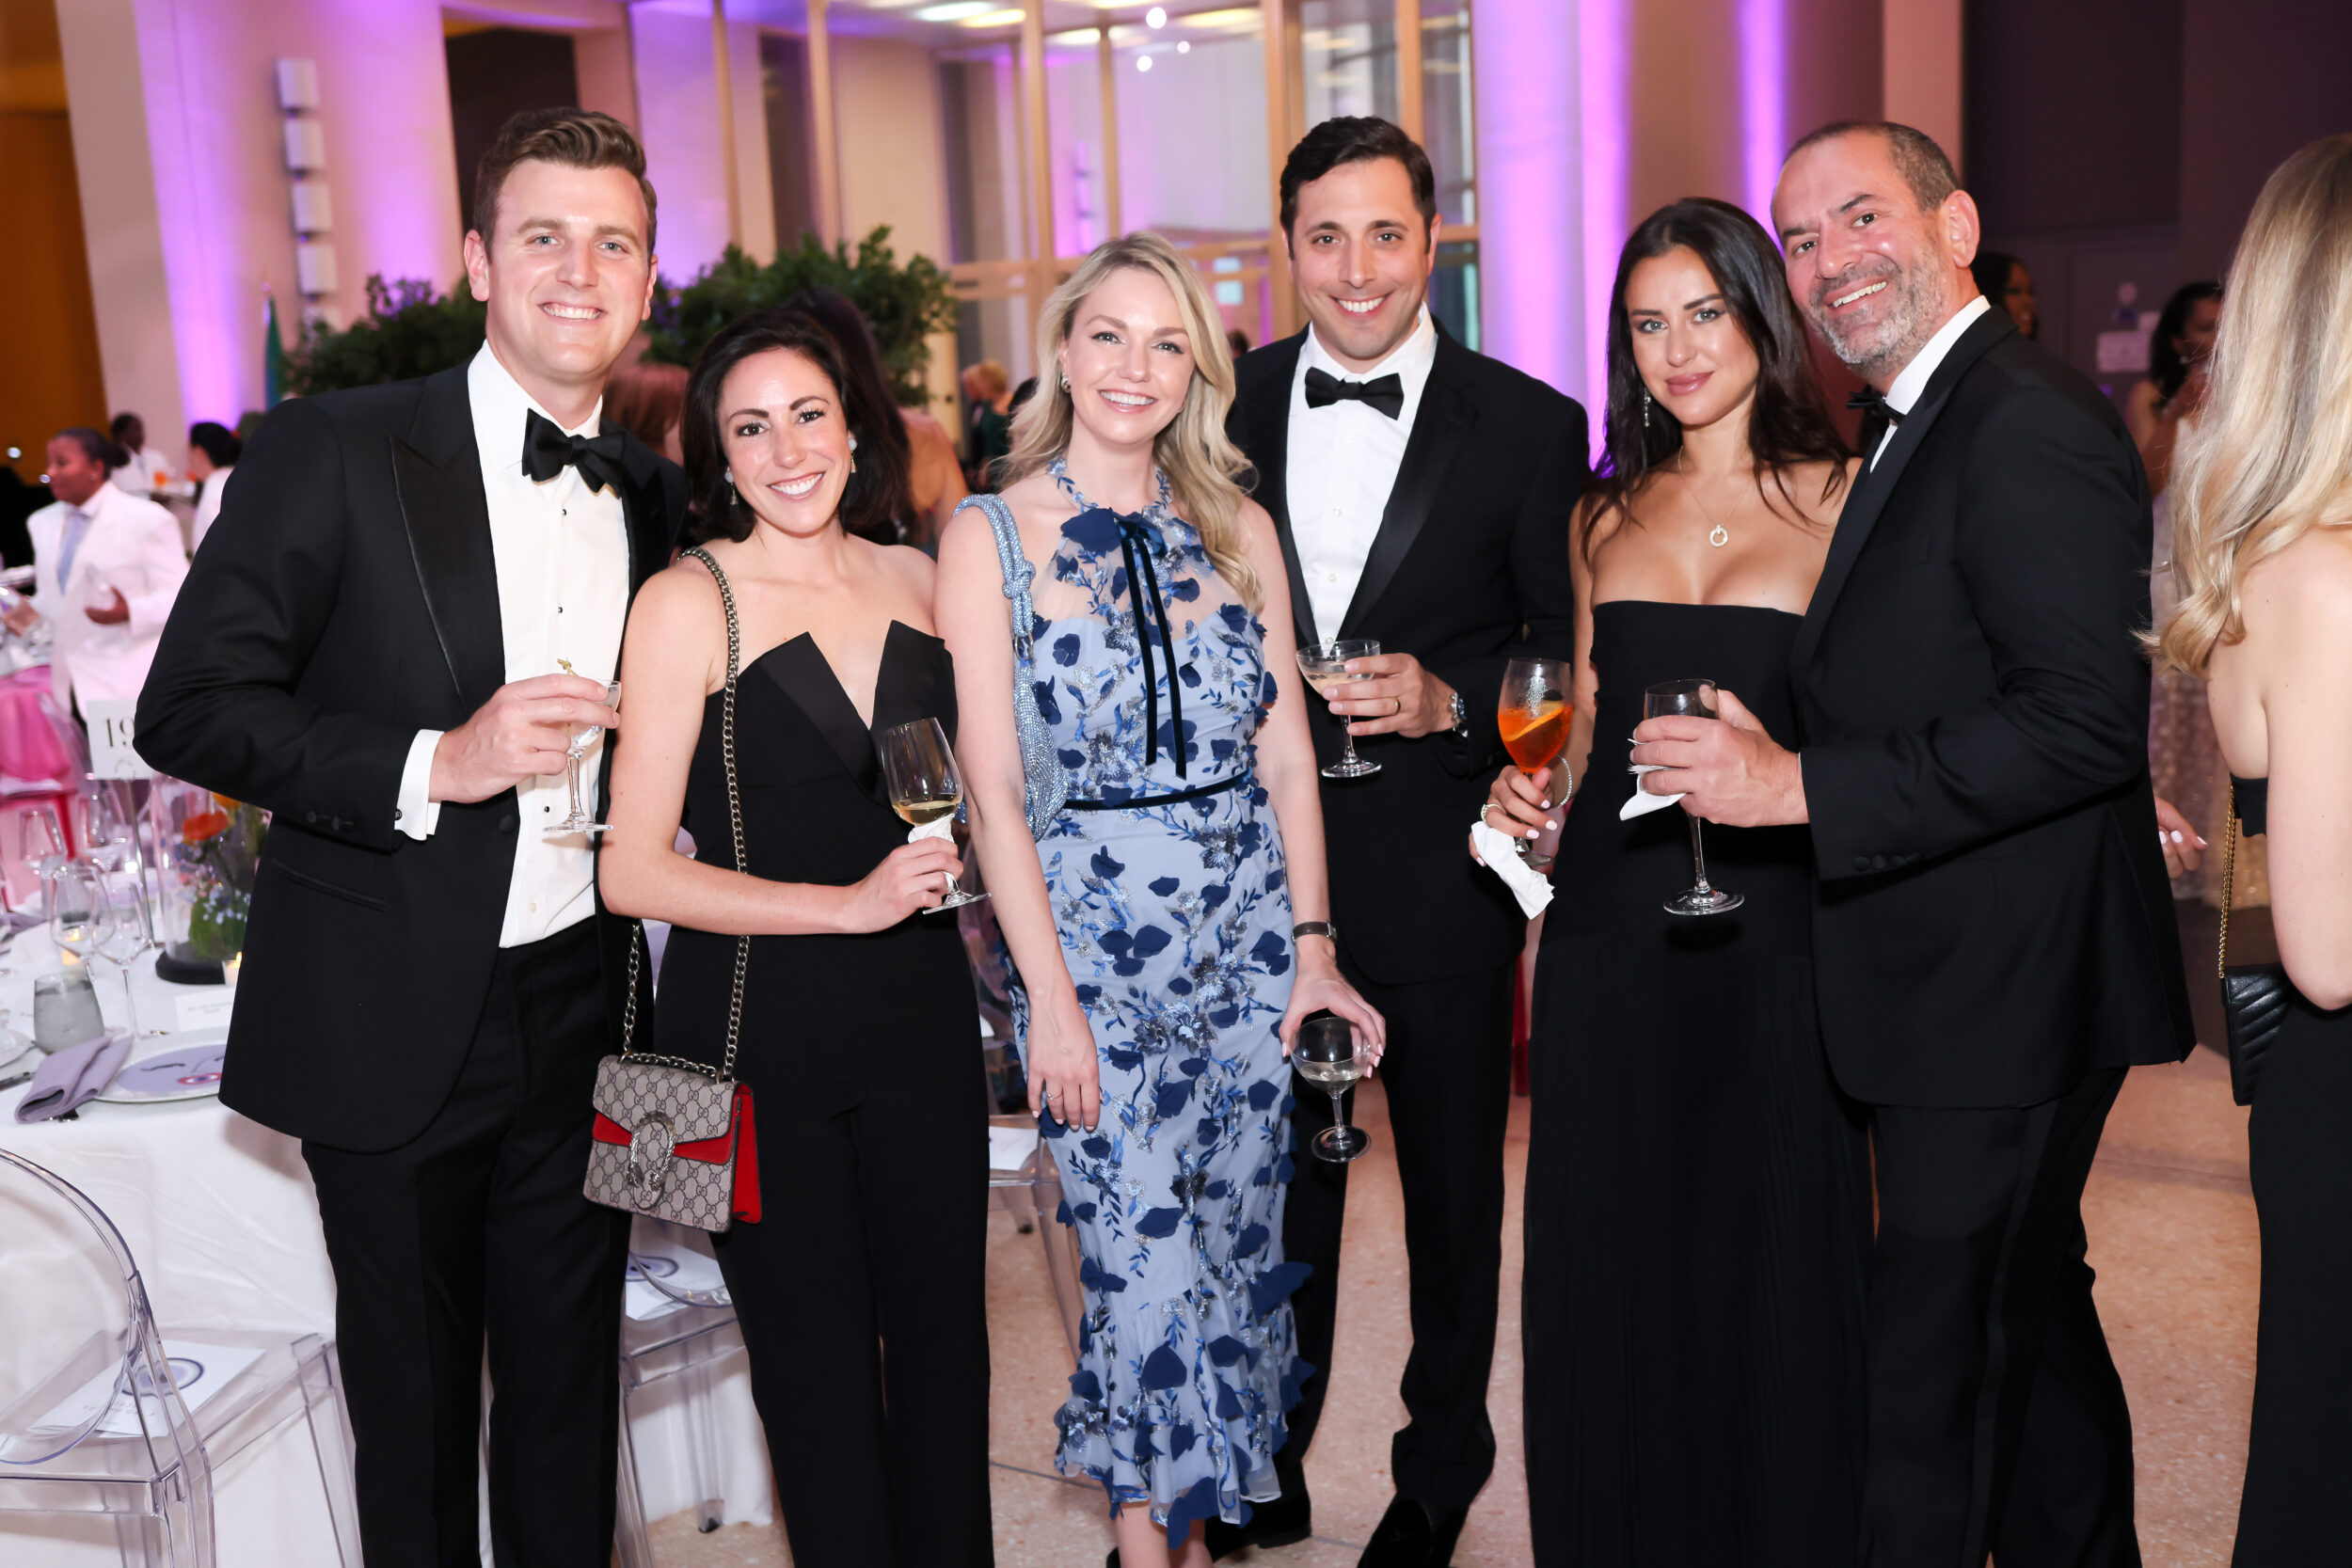 A small group of light-skinned men and women pose for a photo at a black-tie event.